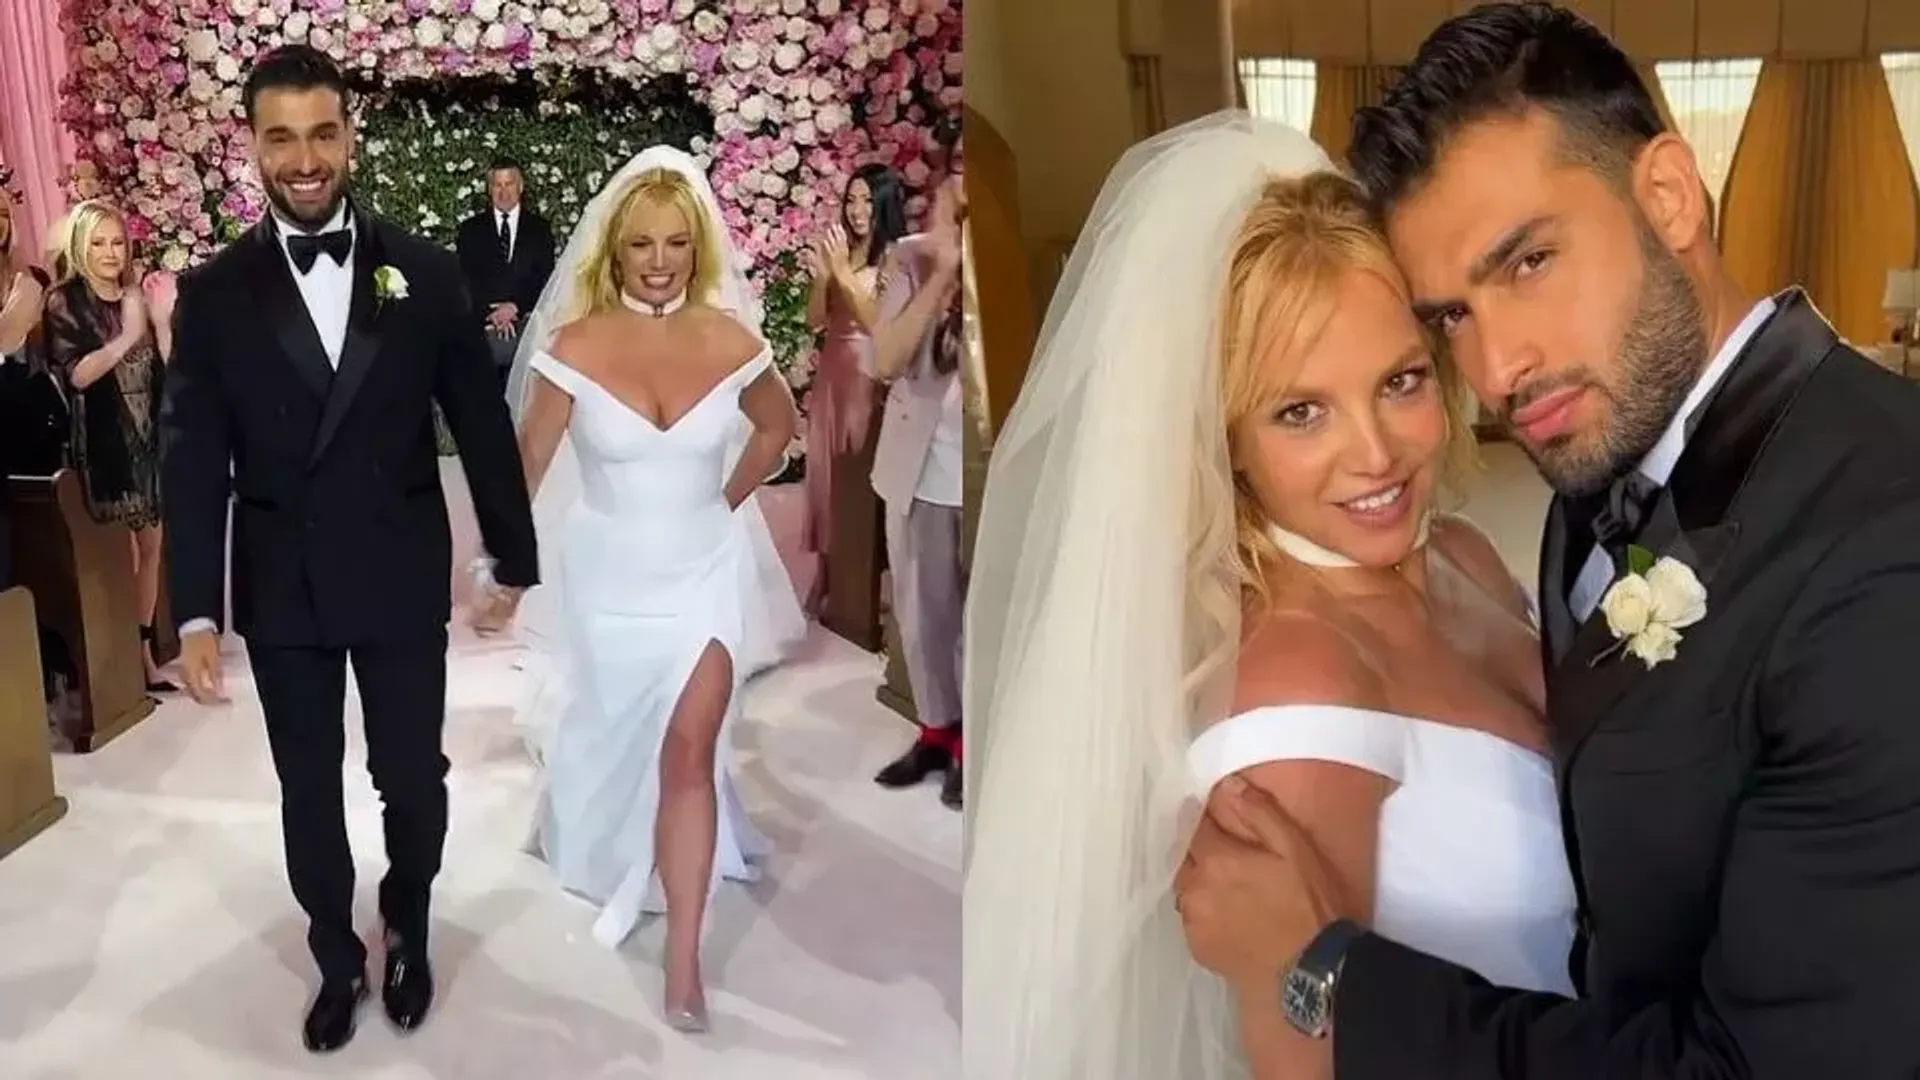 The wedding of Britney and Sam